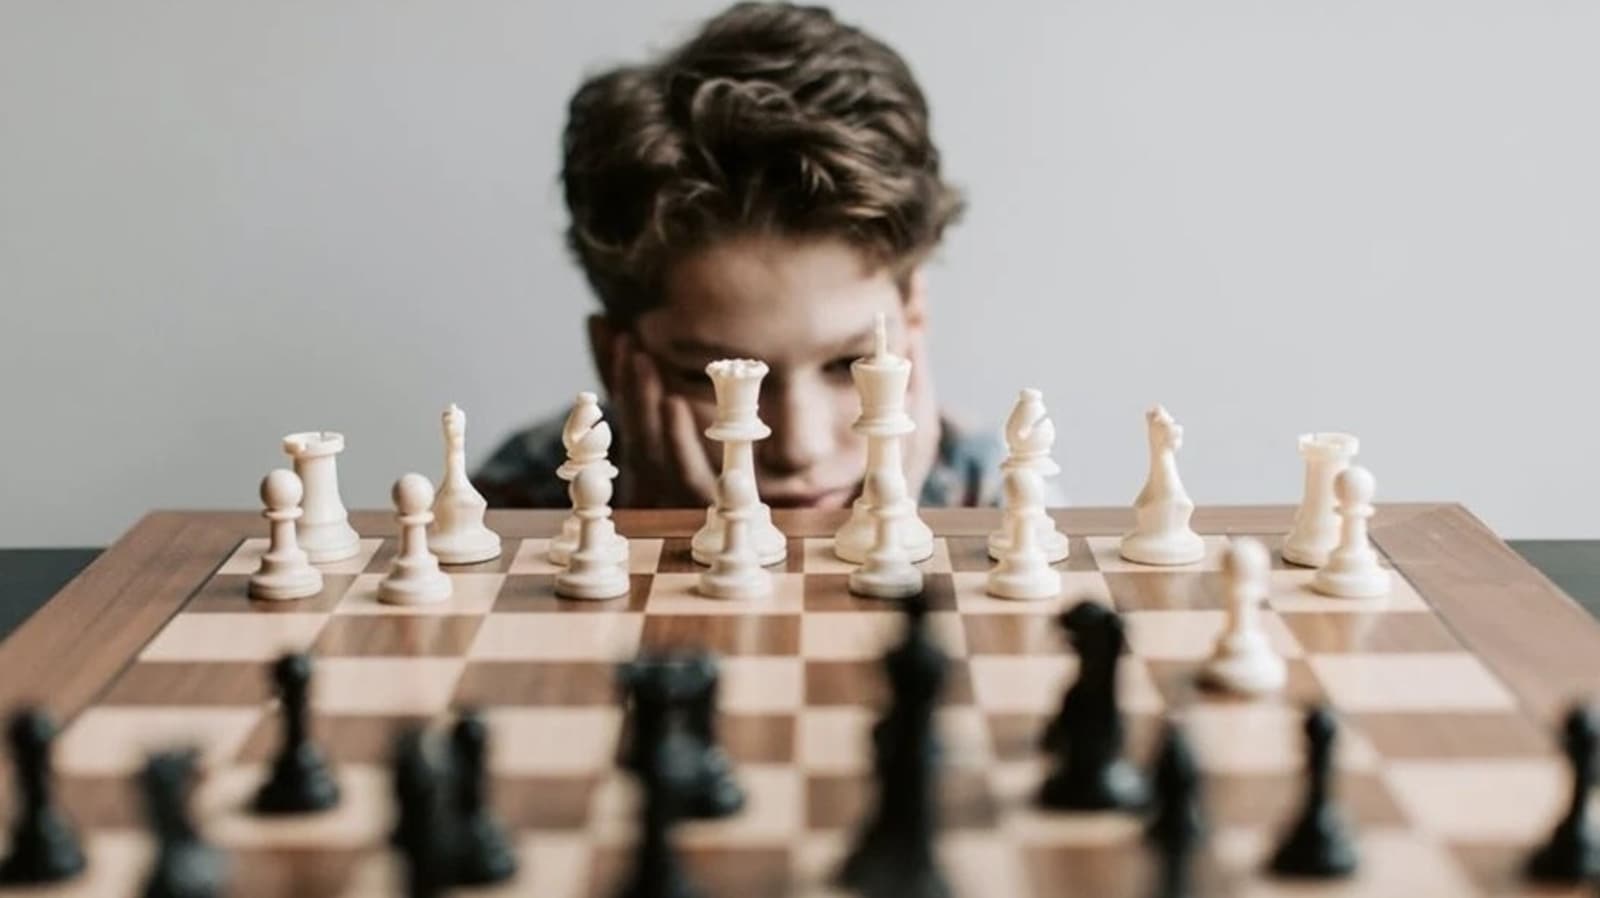 Does Playing Chess or Puzzle-Solving Improve a Child's IQ?